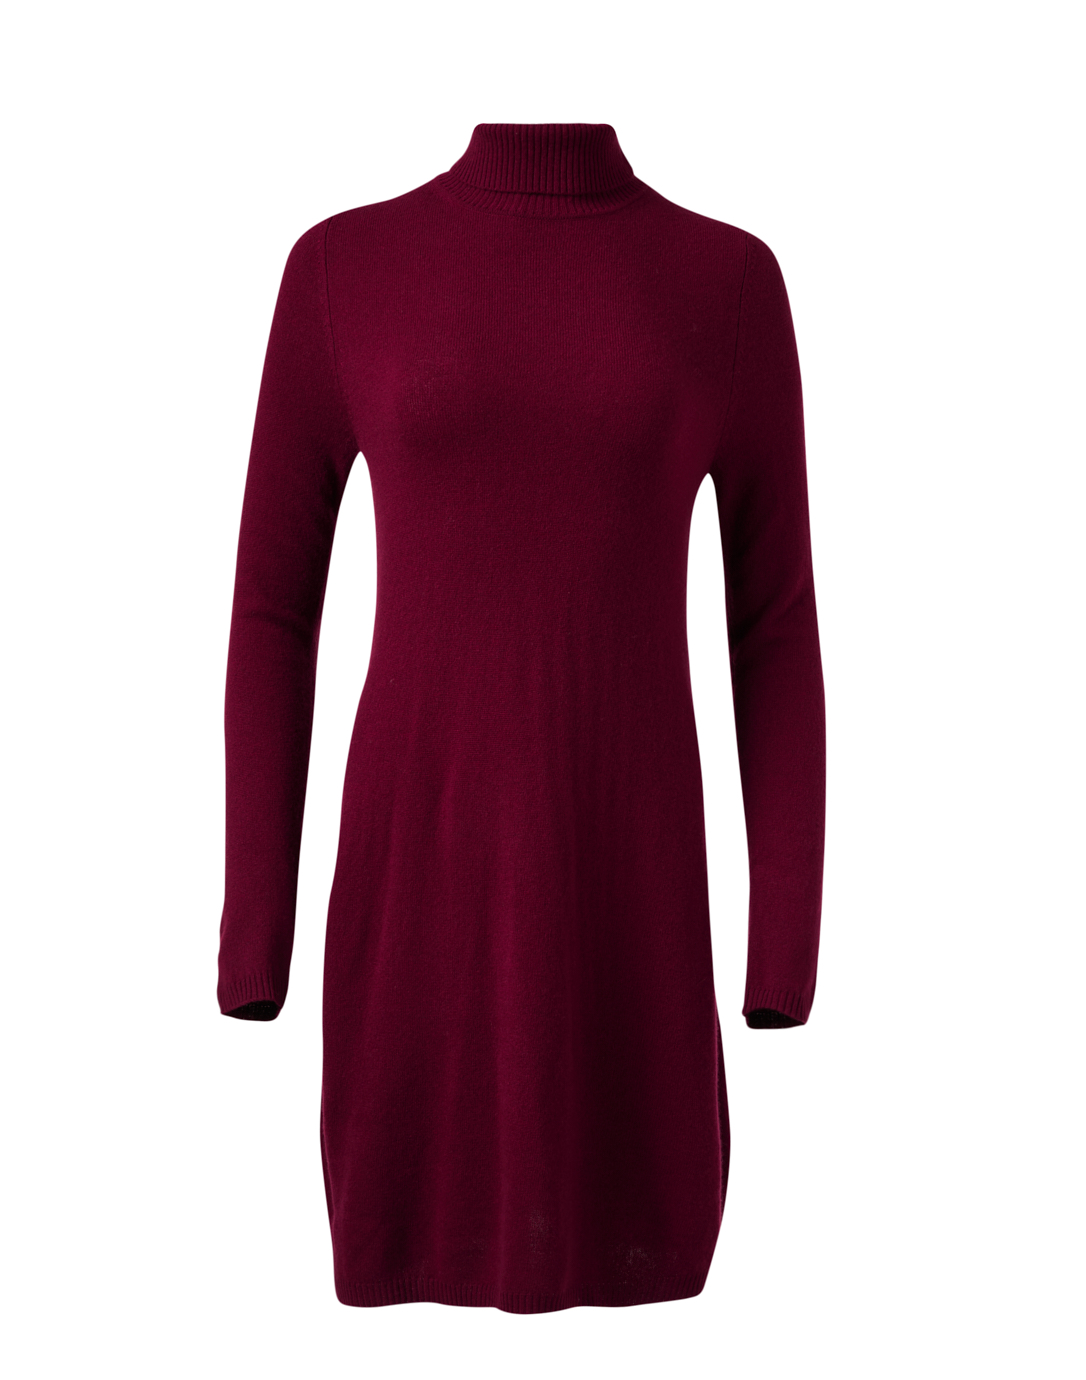 Bordeaux Red Wool Cashmere Turtleneck Dress | Allude